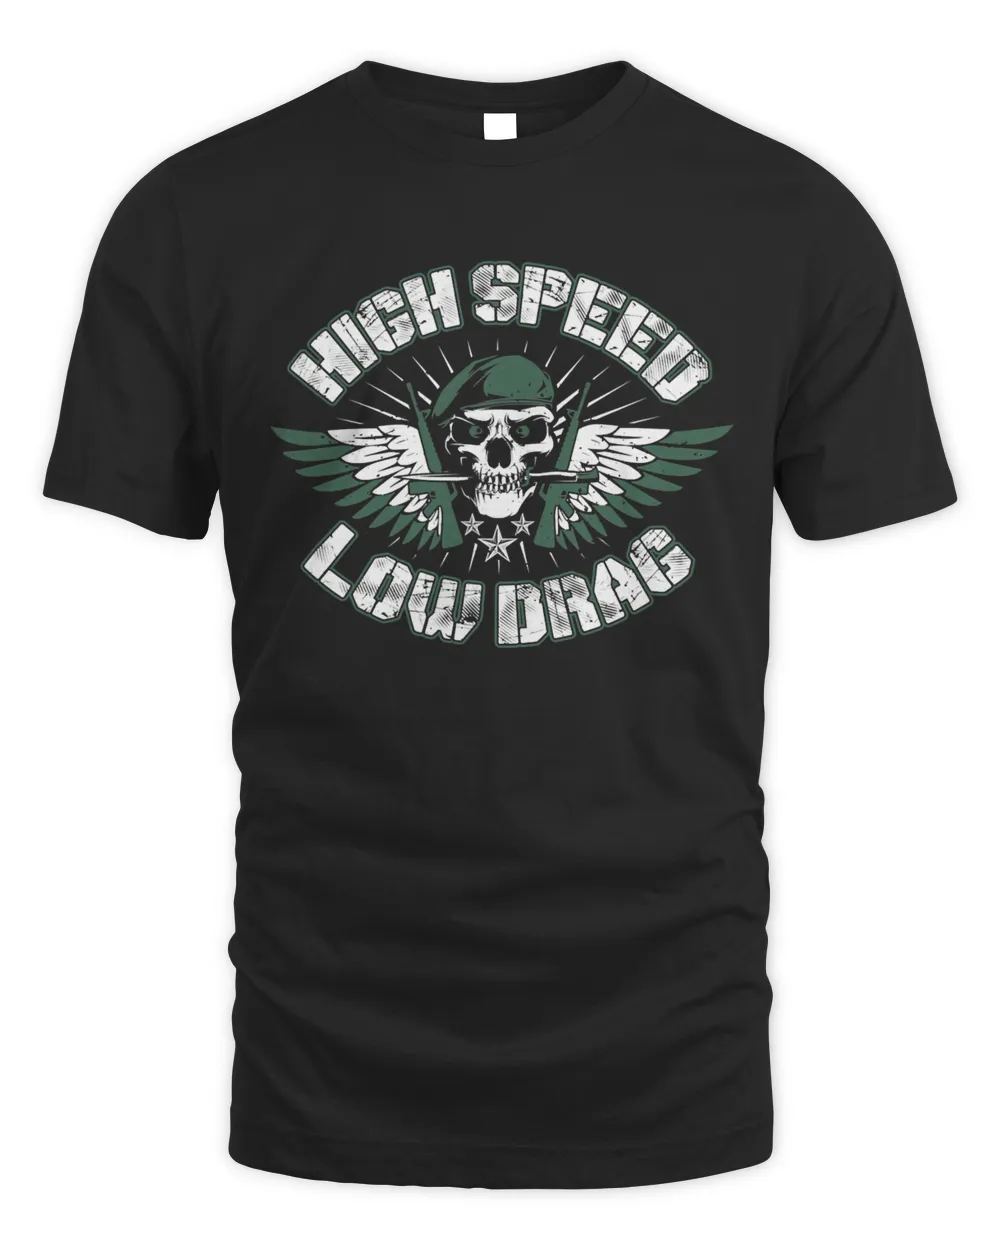 High Speed Low Drag Airborne Spec Ops T Shirt